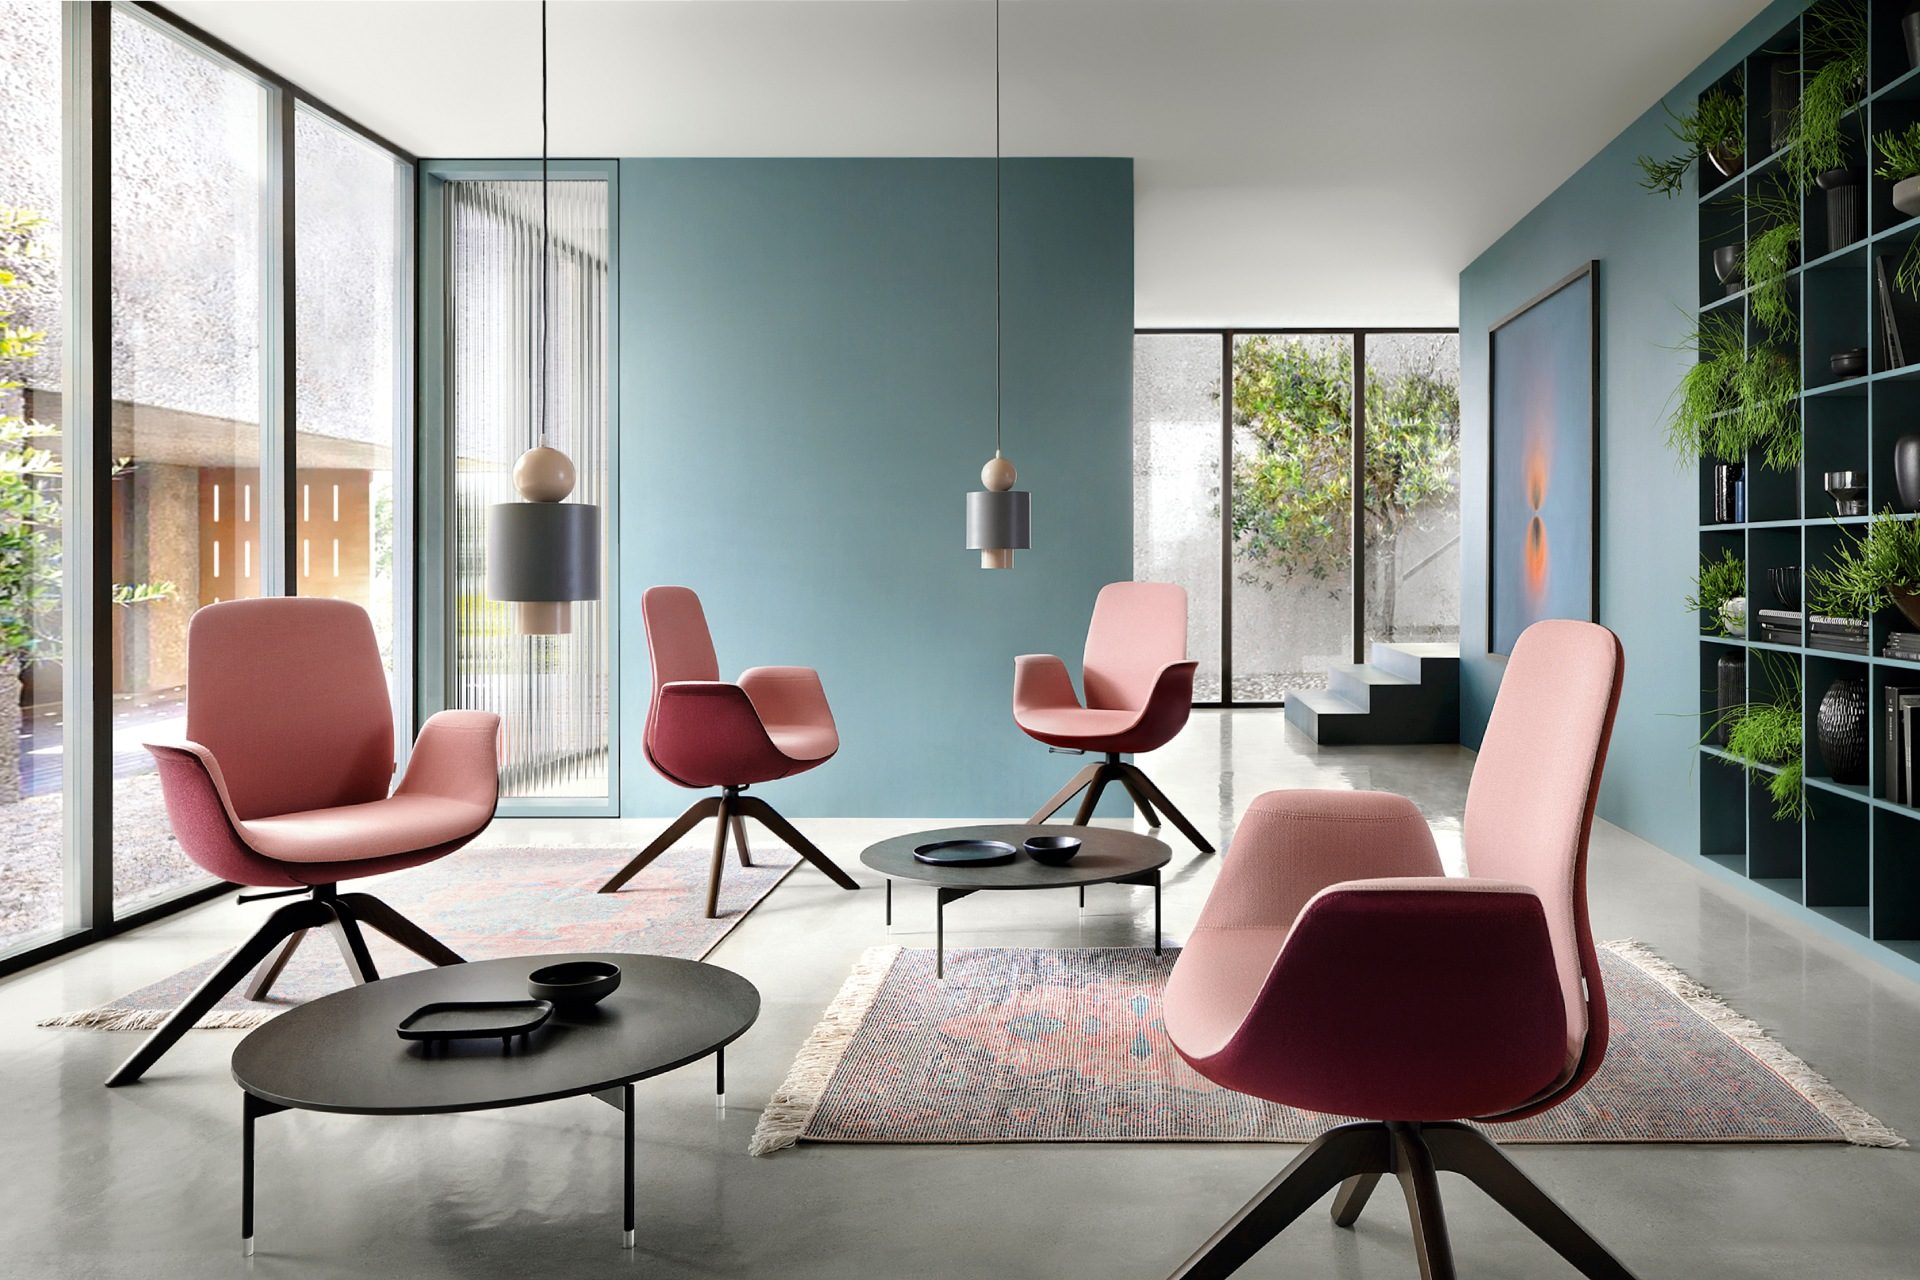 ElliePro design office and desk chairs from Profim, available in a variety of fabric colours